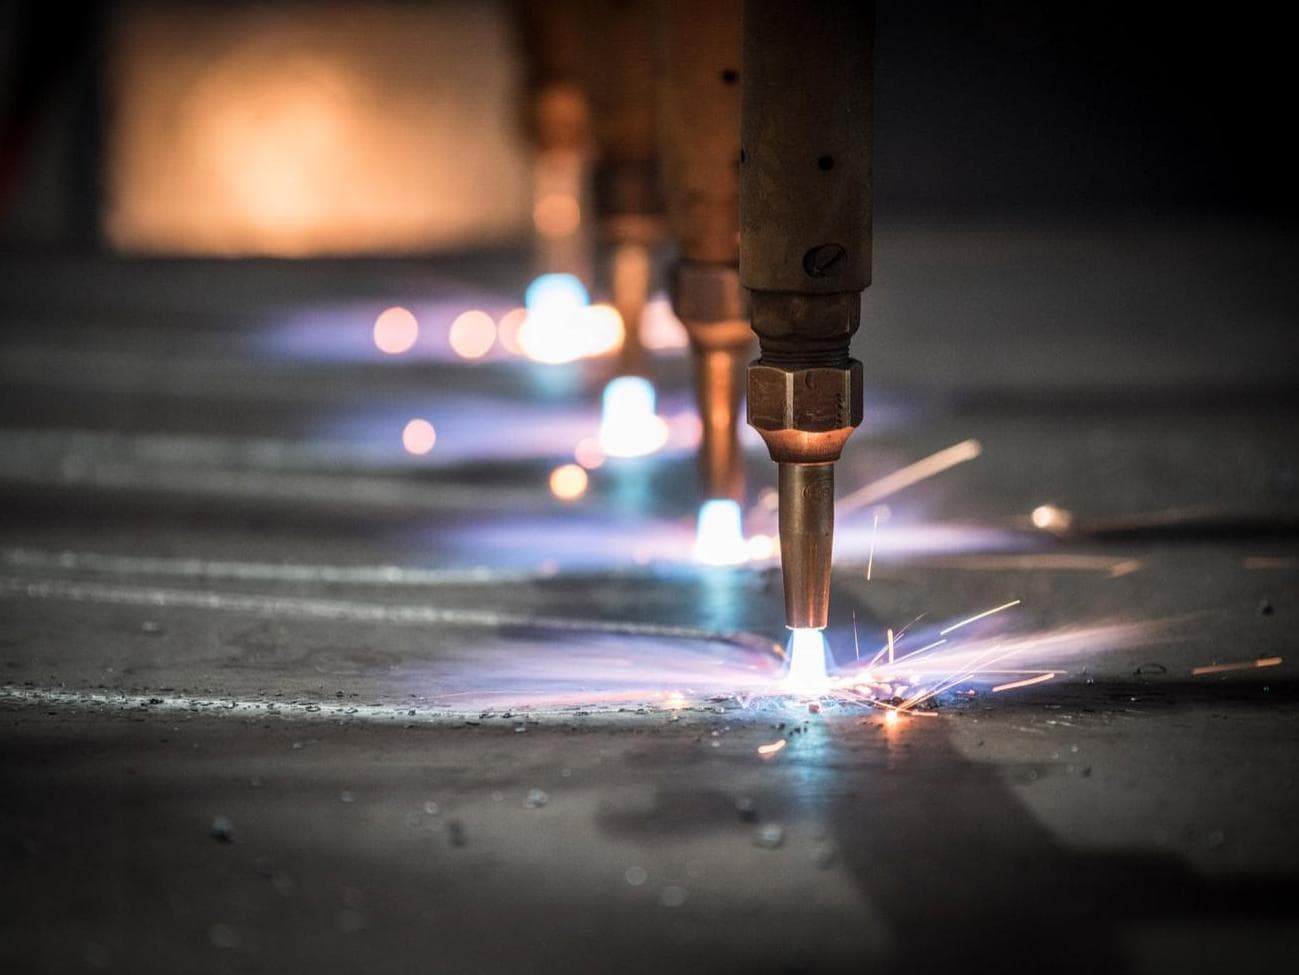 Machines welding and throwing off sparks